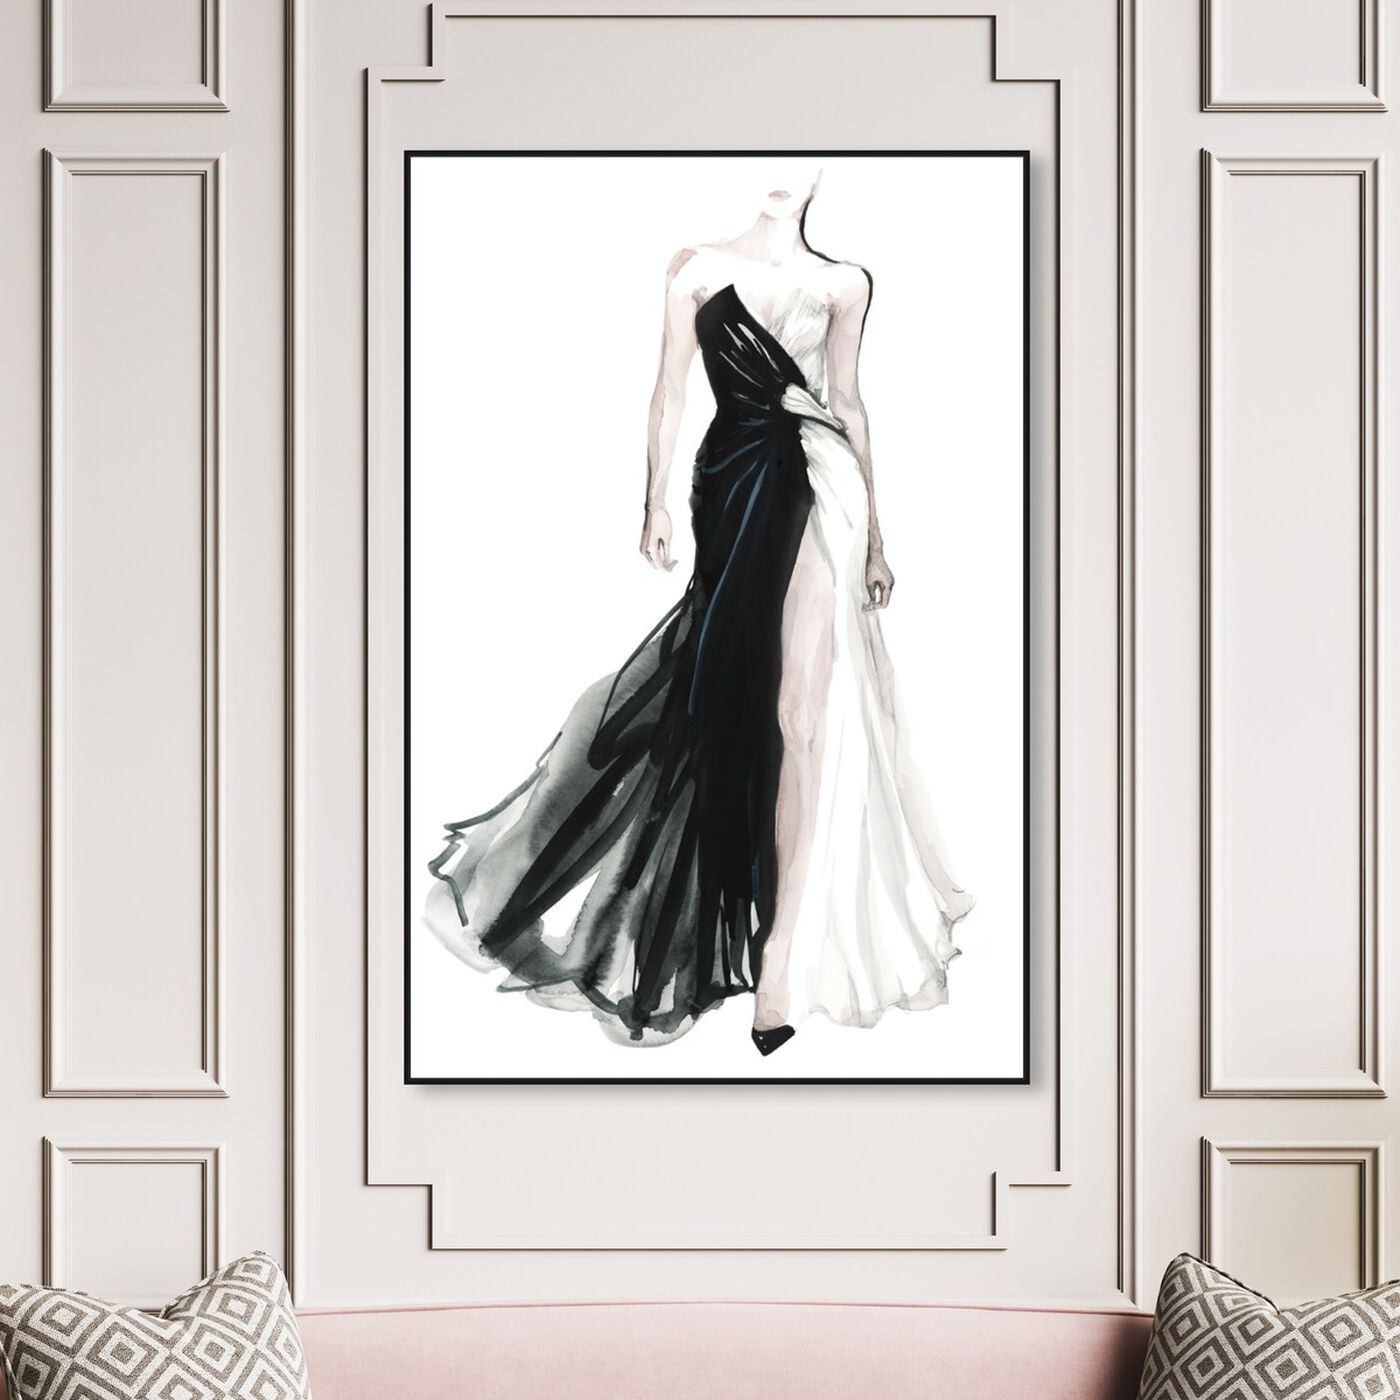 Hanging view of Black and White Affair - Gill Bay featuring fashion and glam and dress art.